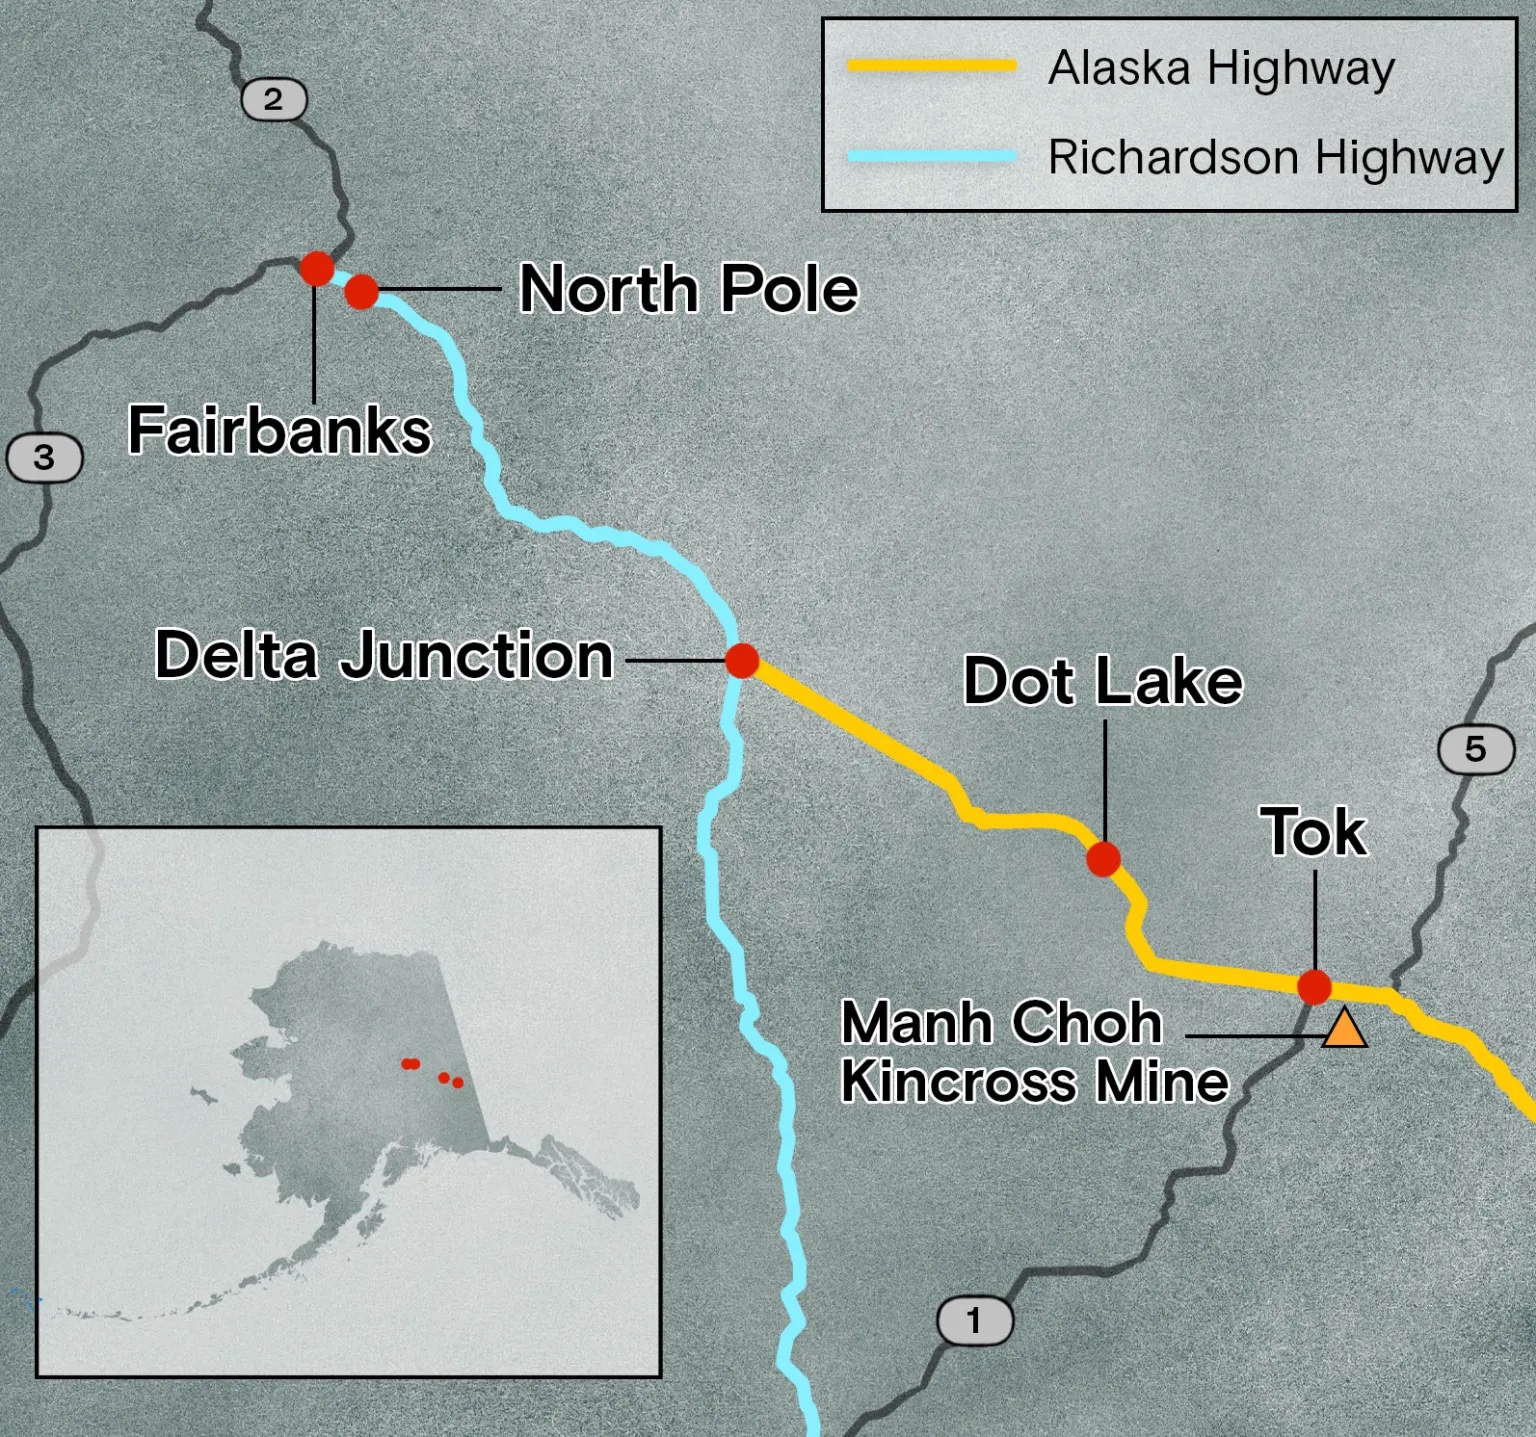 A map of highways from the North pole to Tok in Alaska